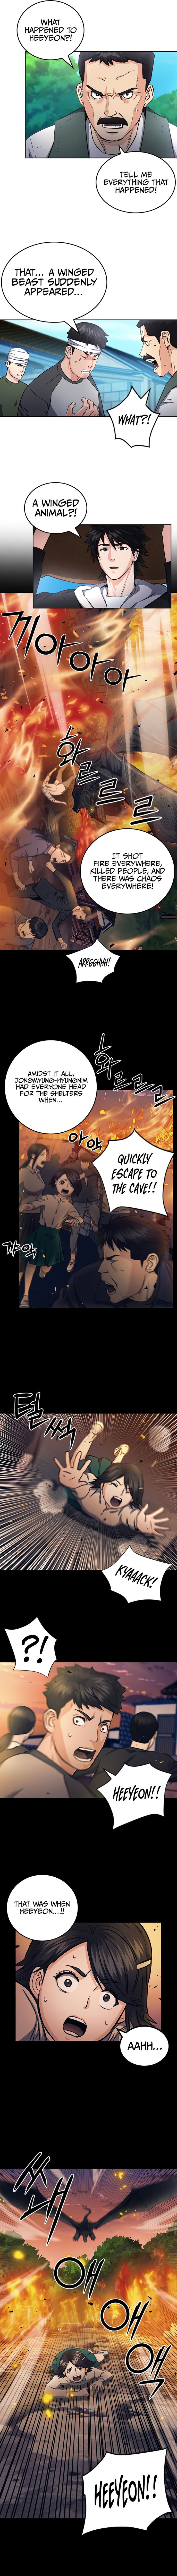 Seoul Station Druid - Chapter 58 Page 10